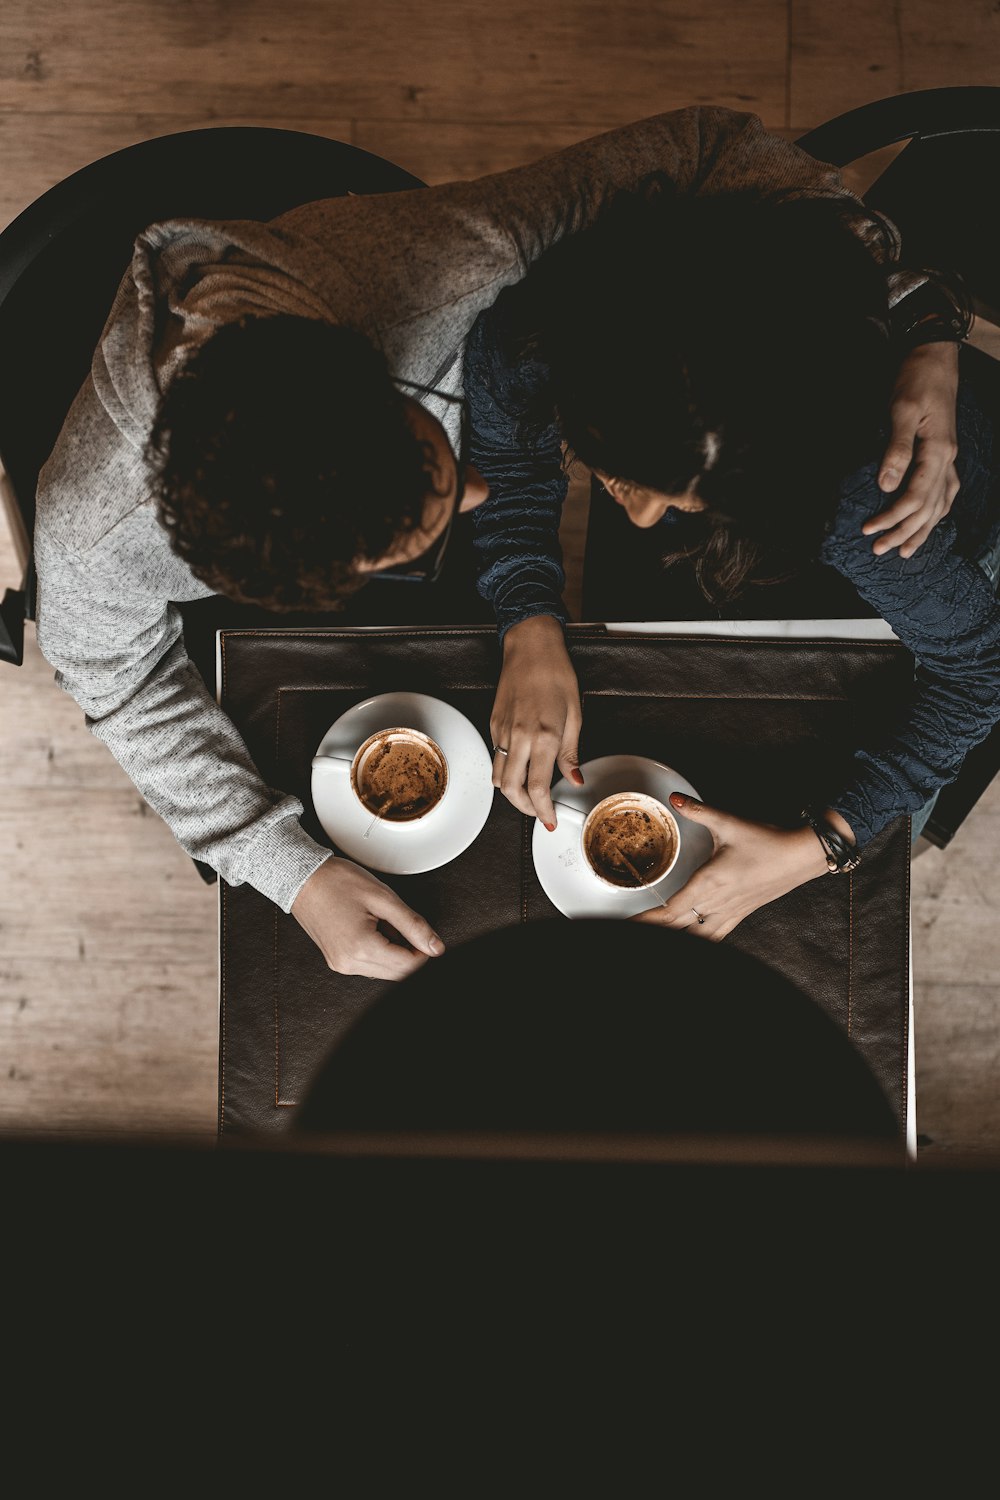 man and woman sitting on floor while holding cups on table